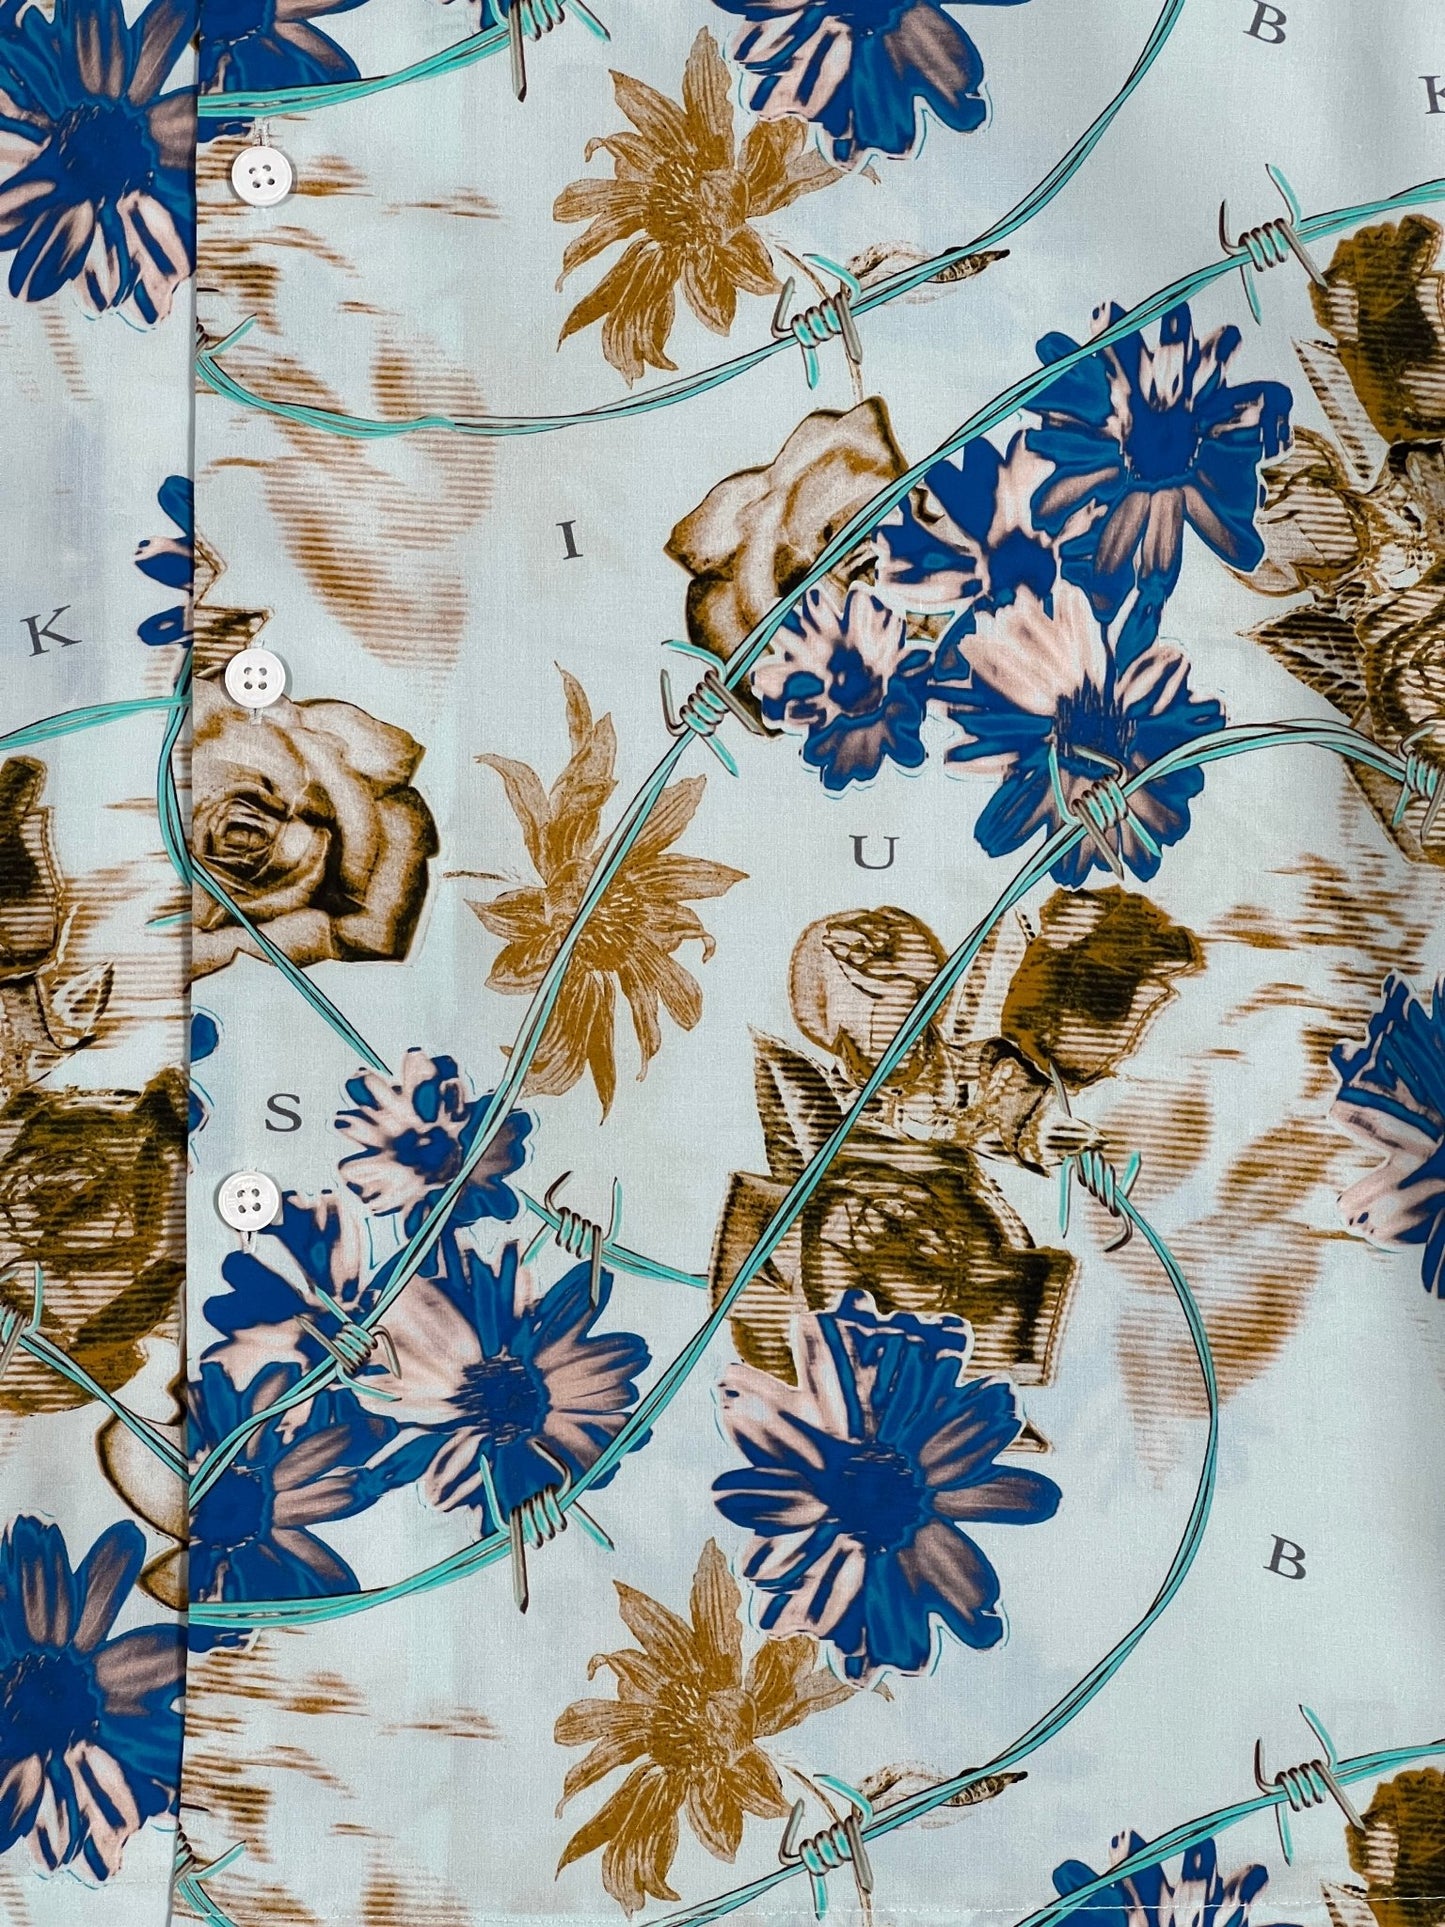 A KSUBI blue and brown short sleeve shirt with floral print on it.